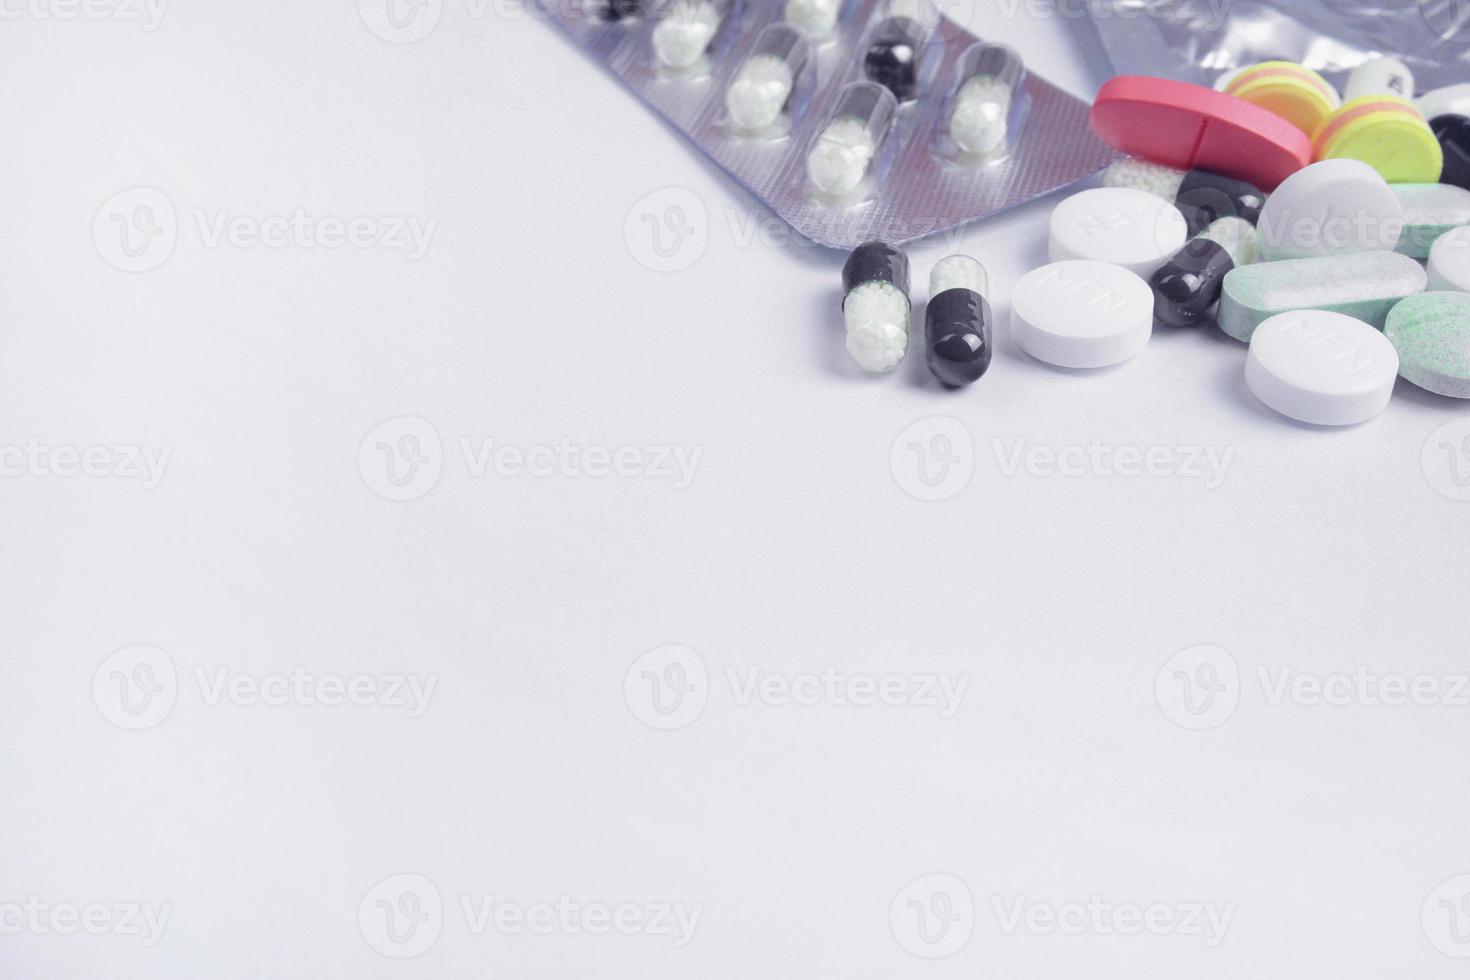 Multicolored pills and tablets on white background photo